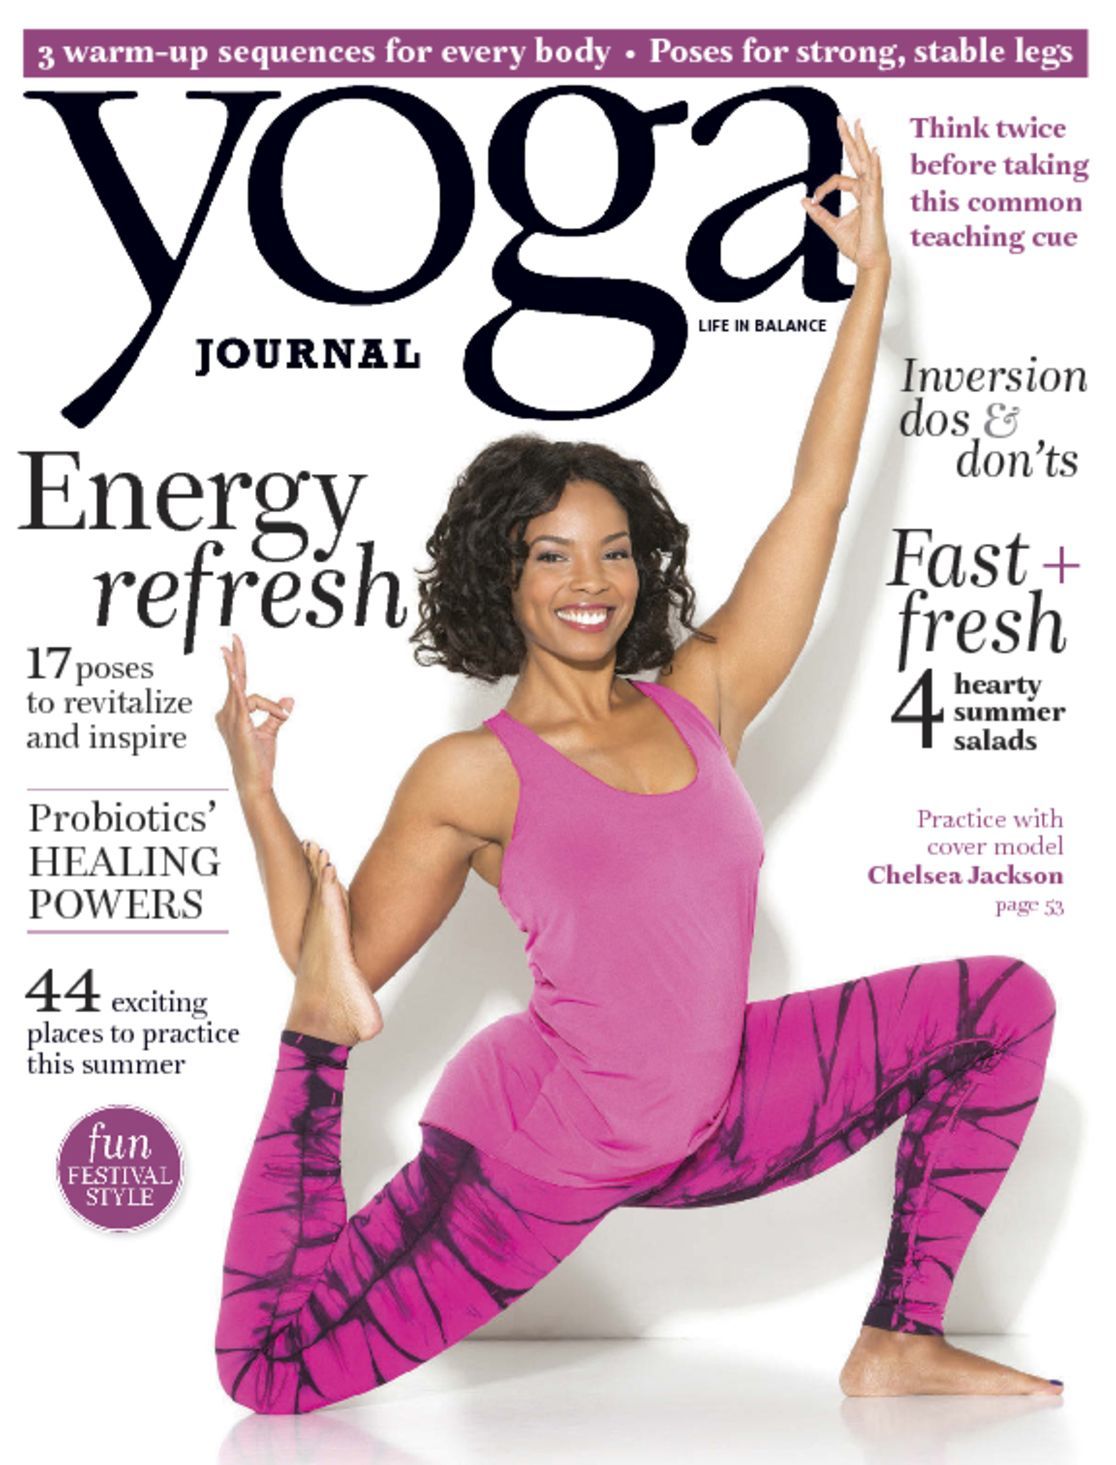 5806-yoga-journal-Cover-2015-May-Issue - deranged.mederanged.me